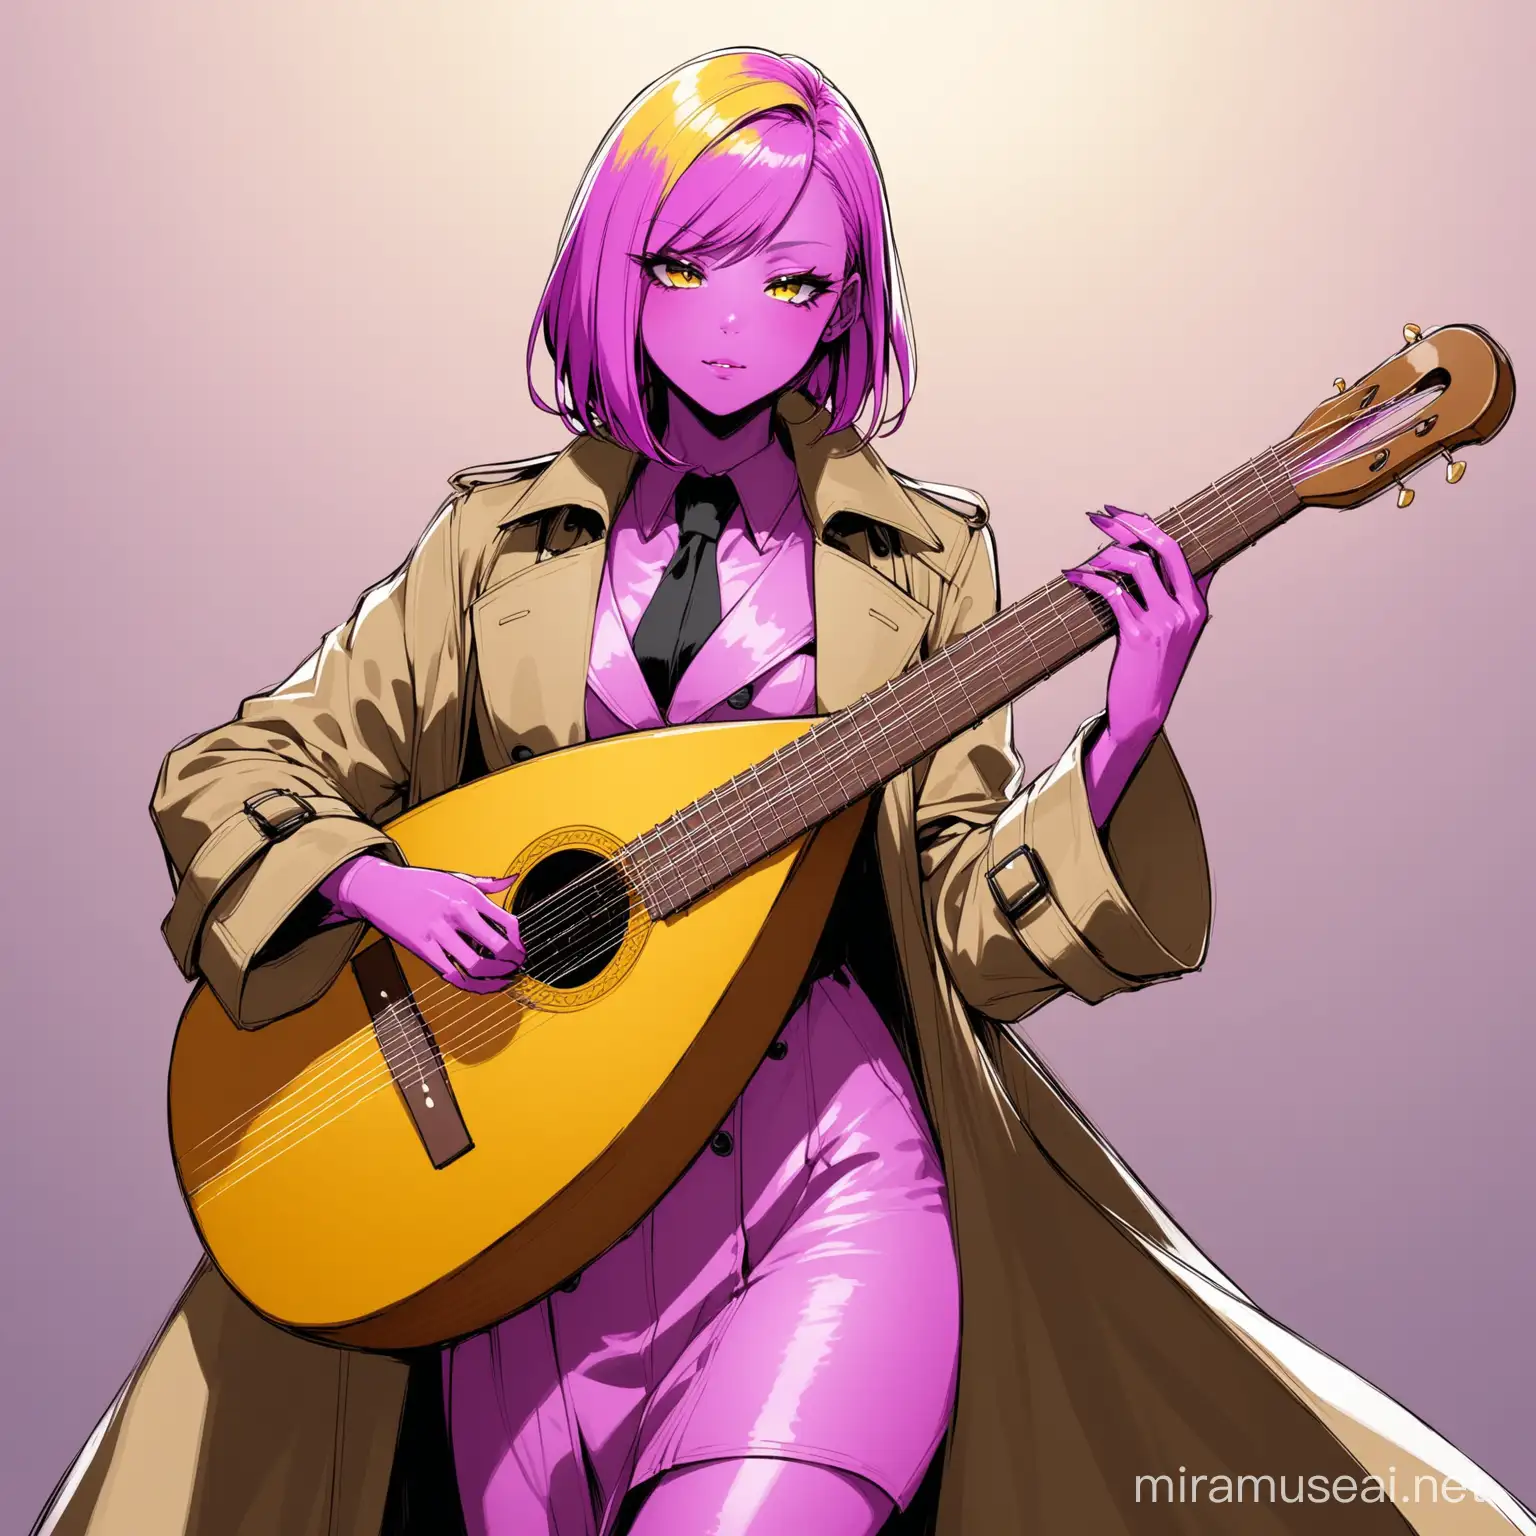 pink skin, female, purple and yellow hair, playing a lute wearing a trench coat